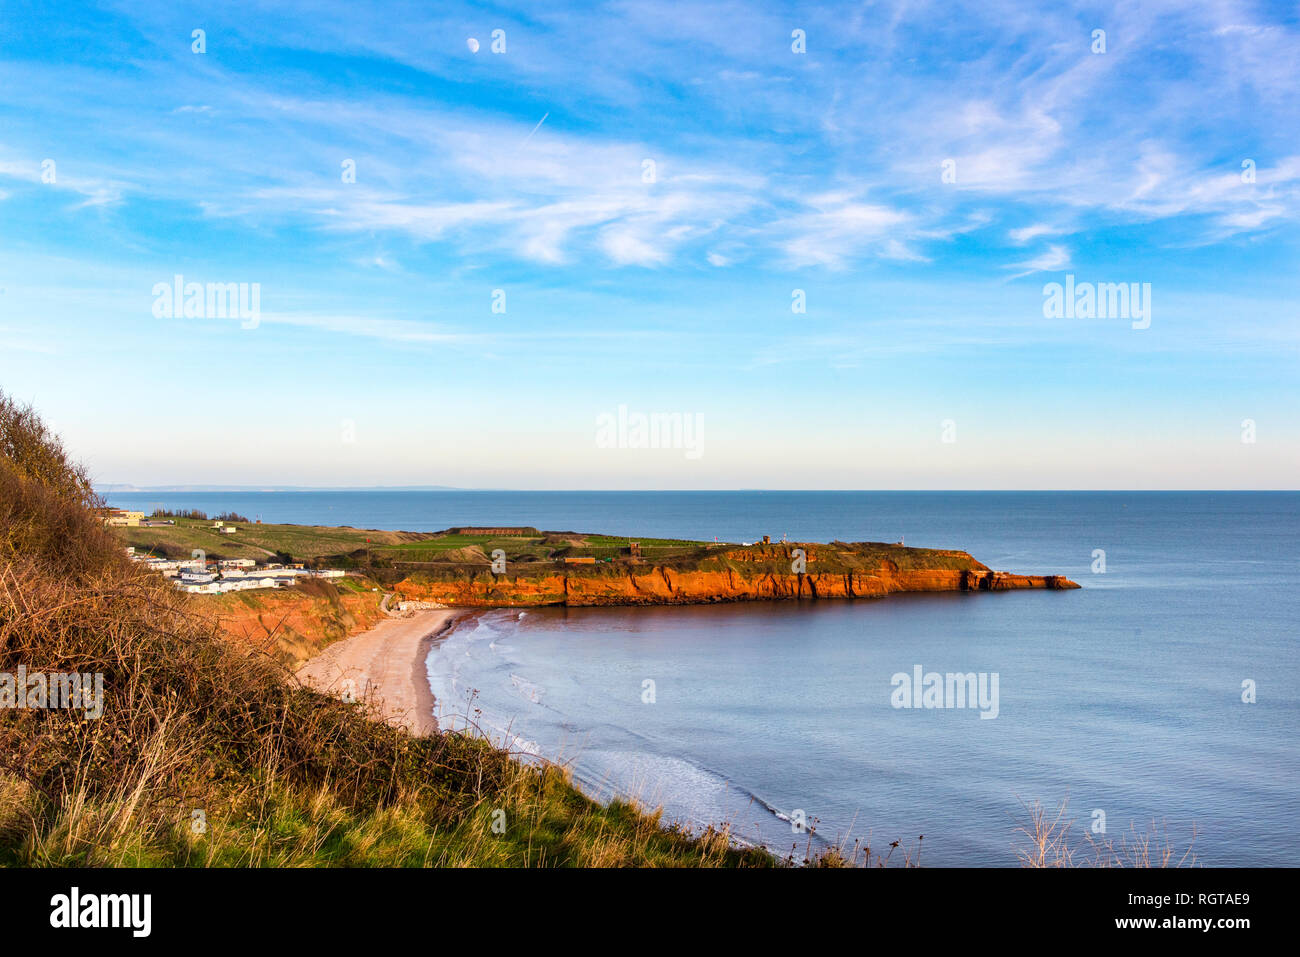 EXMOUTH, DEVON, UK - 17Jan2019: View of Sandy Bay and the triassic red sandstone Straight Point, showing part of the Devon Cliffs Holiday Park. Stock Photo